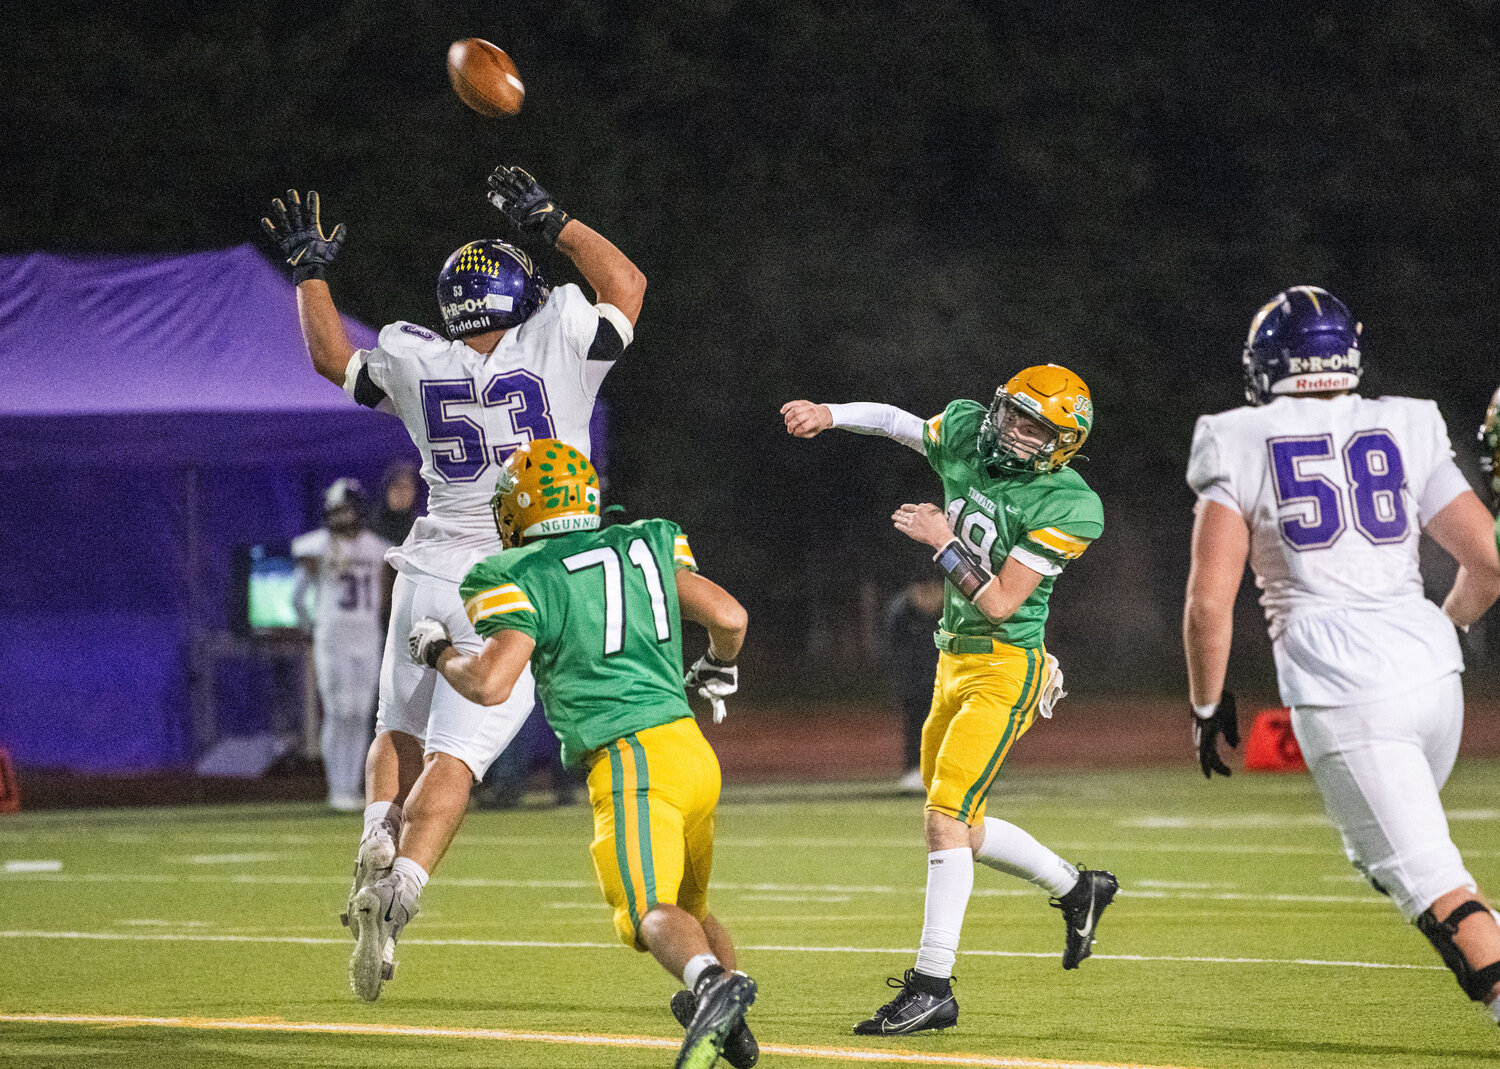 Tumwater quarterback Ethan Kastner (19) lofts a pass over a North Kitsap defender’s head during the 2A state semifinals on Saturday.